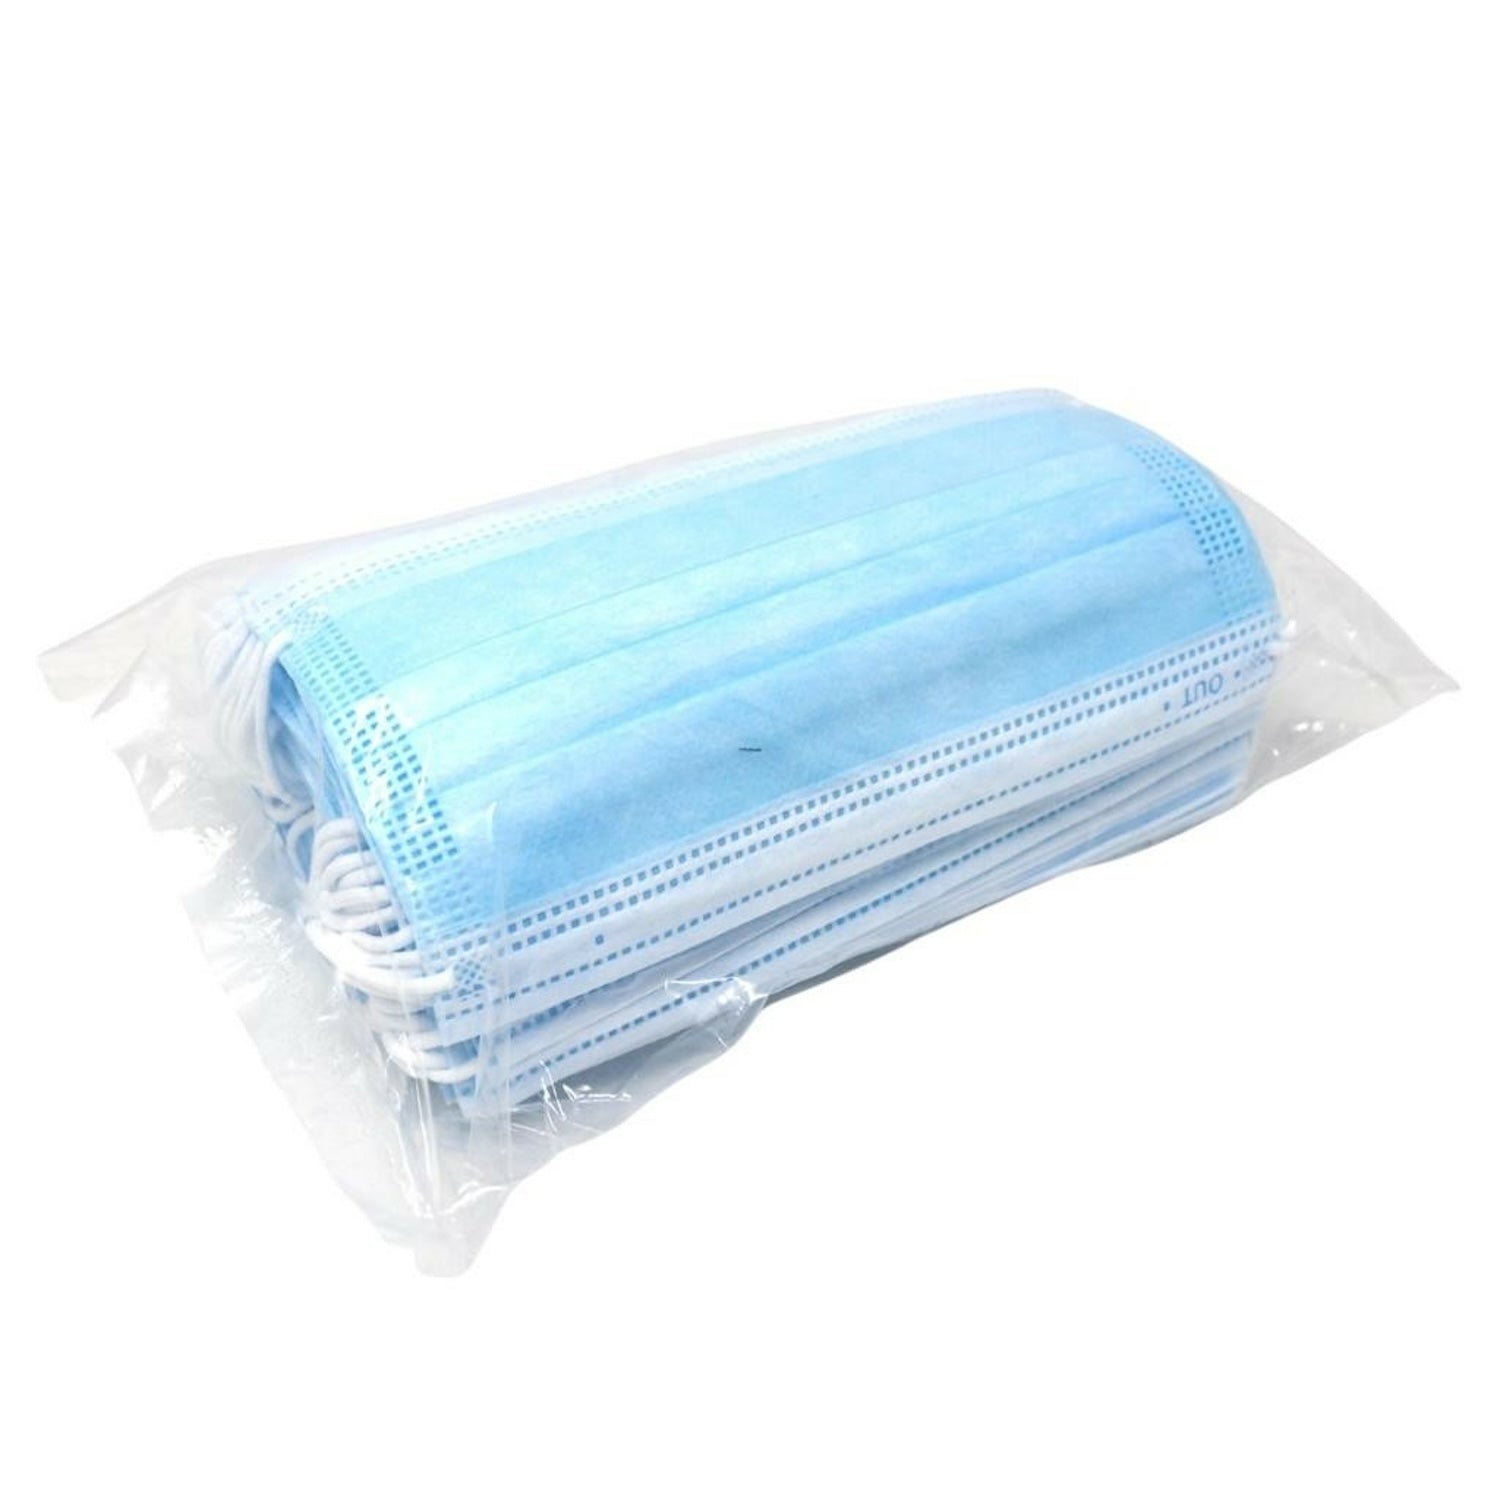 Surgical Type IIR Facemask | Blue | Pack of 50 (1)